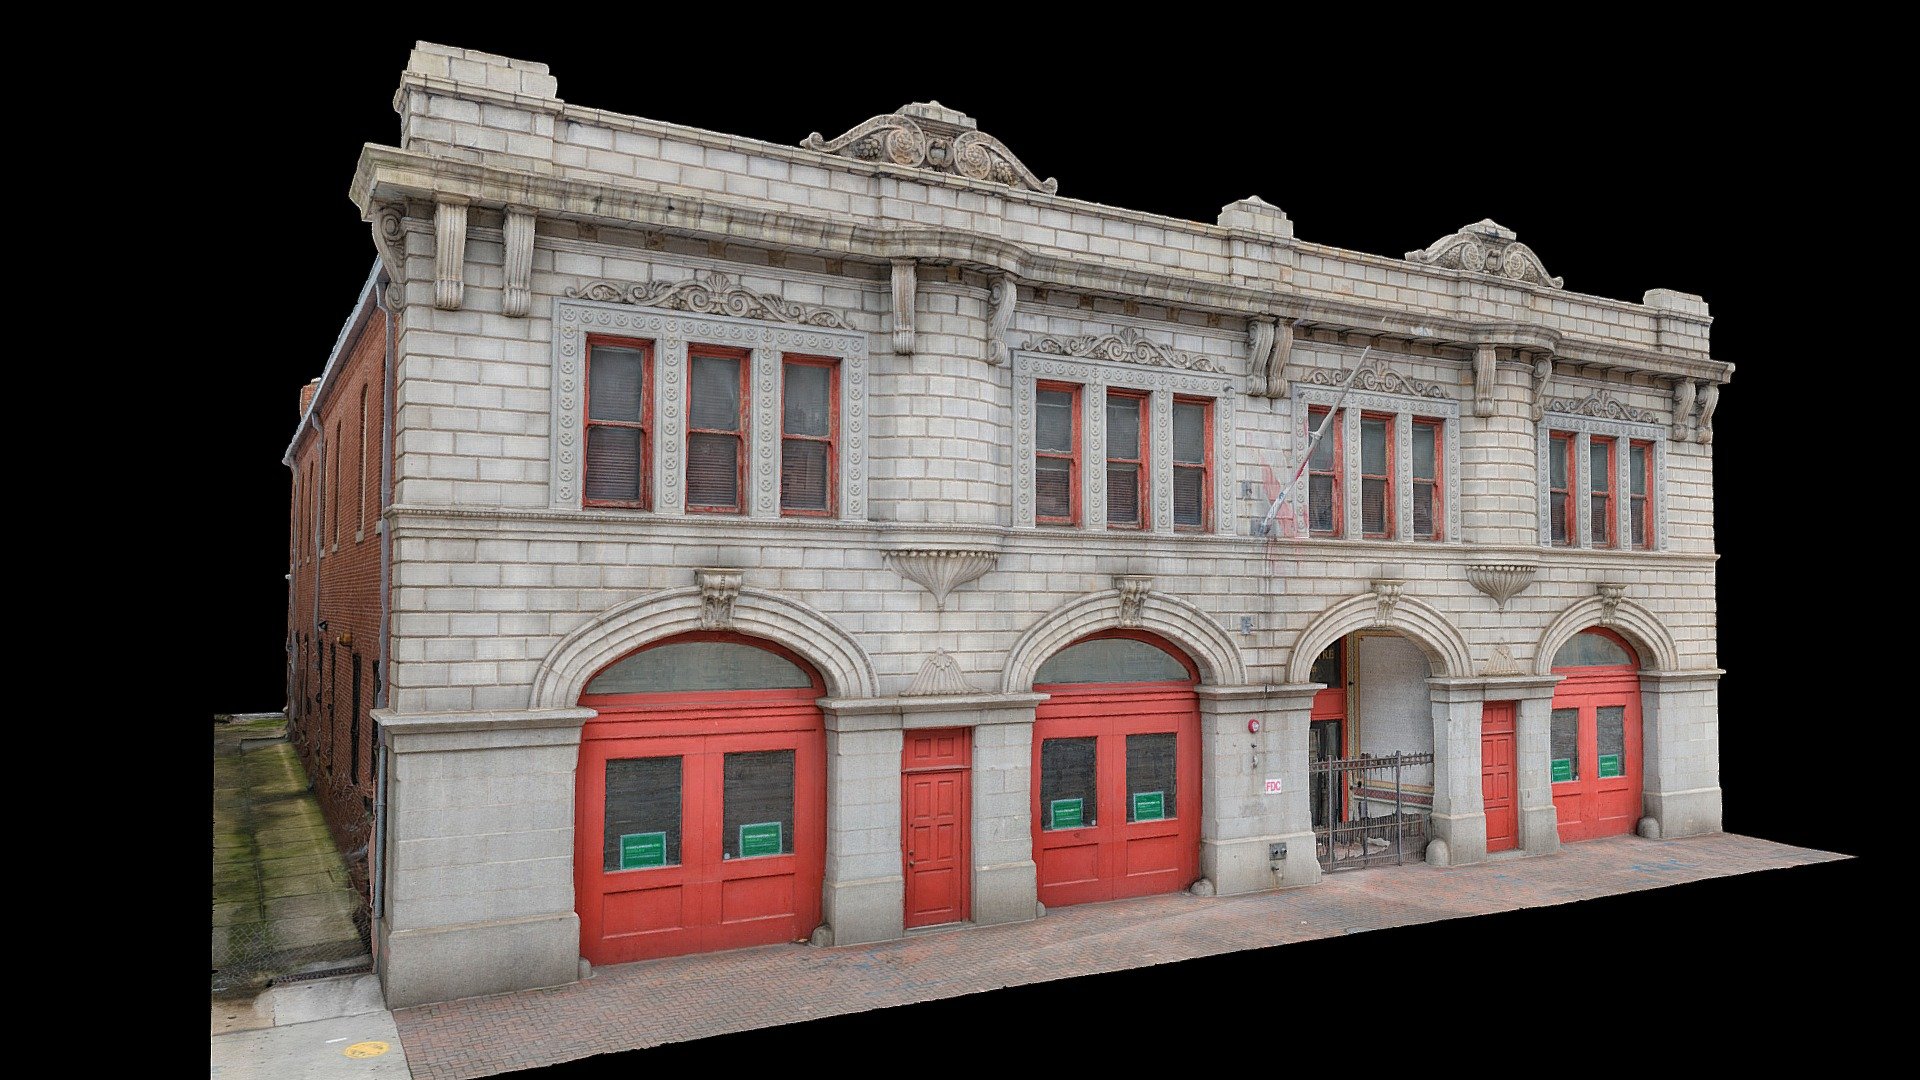 Fire station no. 32 was constructed in 1907, after the Great Baltimore Fire of 1904. At 10:50am on February 7, 1904, a small fire in the business district rapidly spread throughout a large portion of the city by the evening. When the blaze was finally extinguished, “an 80-block area of the downtown area, stretching from the waterfront to Mount Vernon on Charles Street, had been destroyed” (History.com). Consequently, Baltimore City erected dozens of new fire stations after this event. More recently, the interior was completely renovated in 1984 to an office building, and in 1997 to house Baltimore City College. 

I would like to reconstruct the fence and back portion of the building later using CAD - any advice/suggestions welcome!

14 S Gay St, Baltimore, MD 21202

39.289153198917624, -76.60912430915629 


Baltimore and Gay Street, 1904, looking South towards the Harbor

Image source: Remembering Baltimore - Baltimore Fire Station No. 32 - 3D model by Taylor (@thoulihan) 3d model